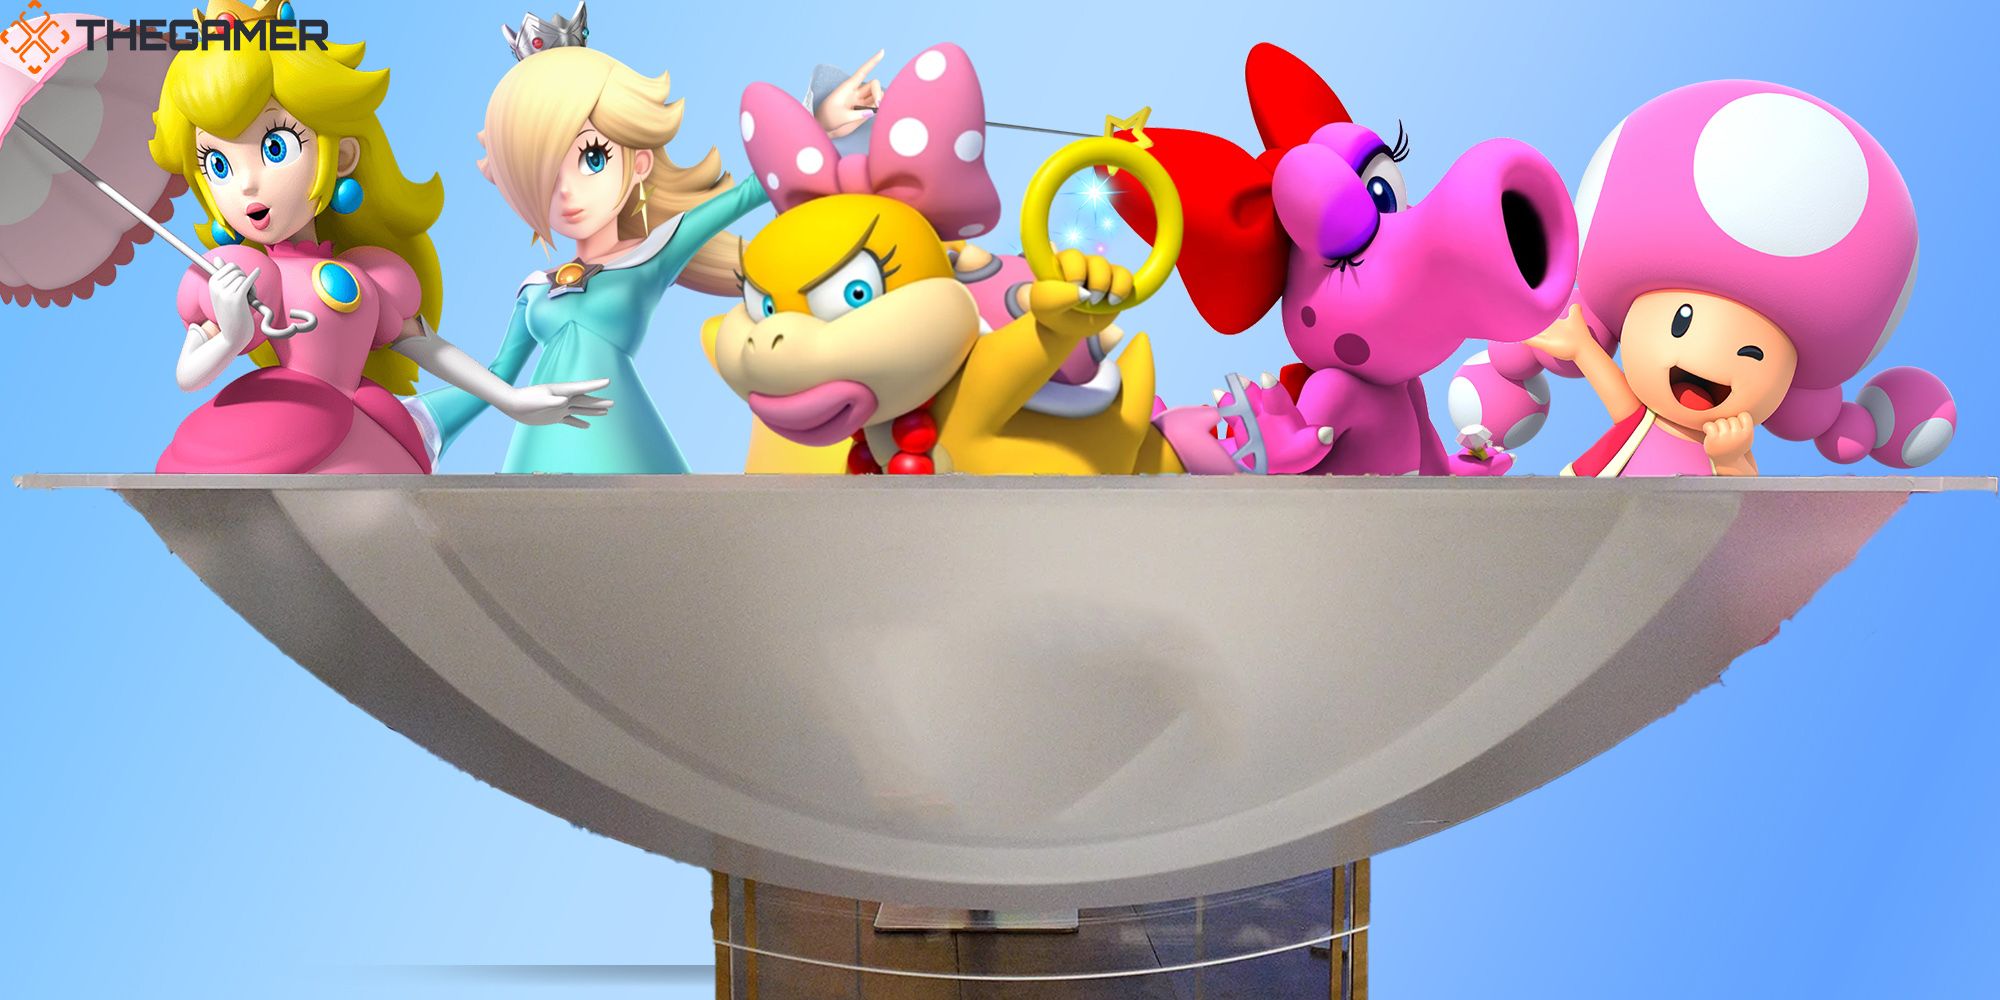 Princess Peach, Rosalina, Wendy O Bowser, Birdo, and Toadette discuss hot topics and current events at a round table.